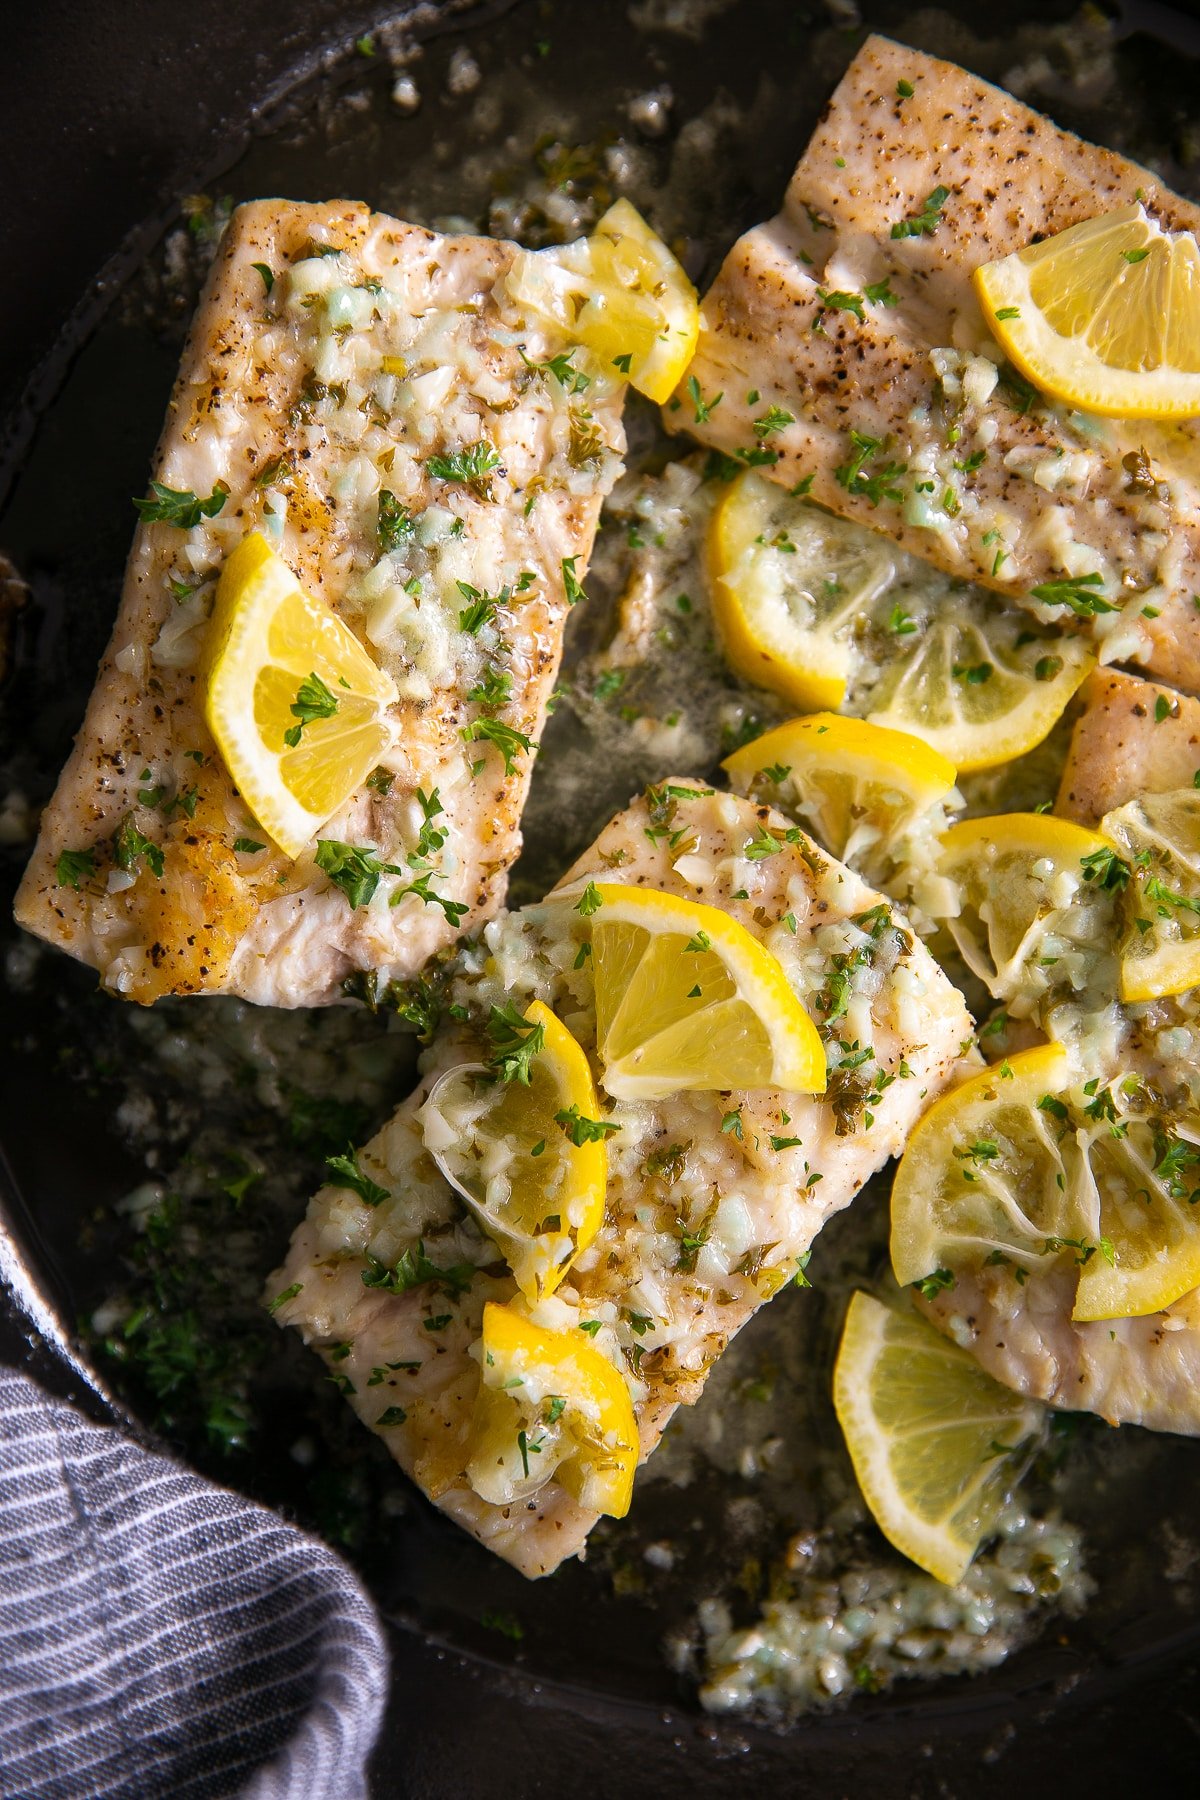 40 Savory Lemon Recipes to Add Some Zest to Your Dinner Table